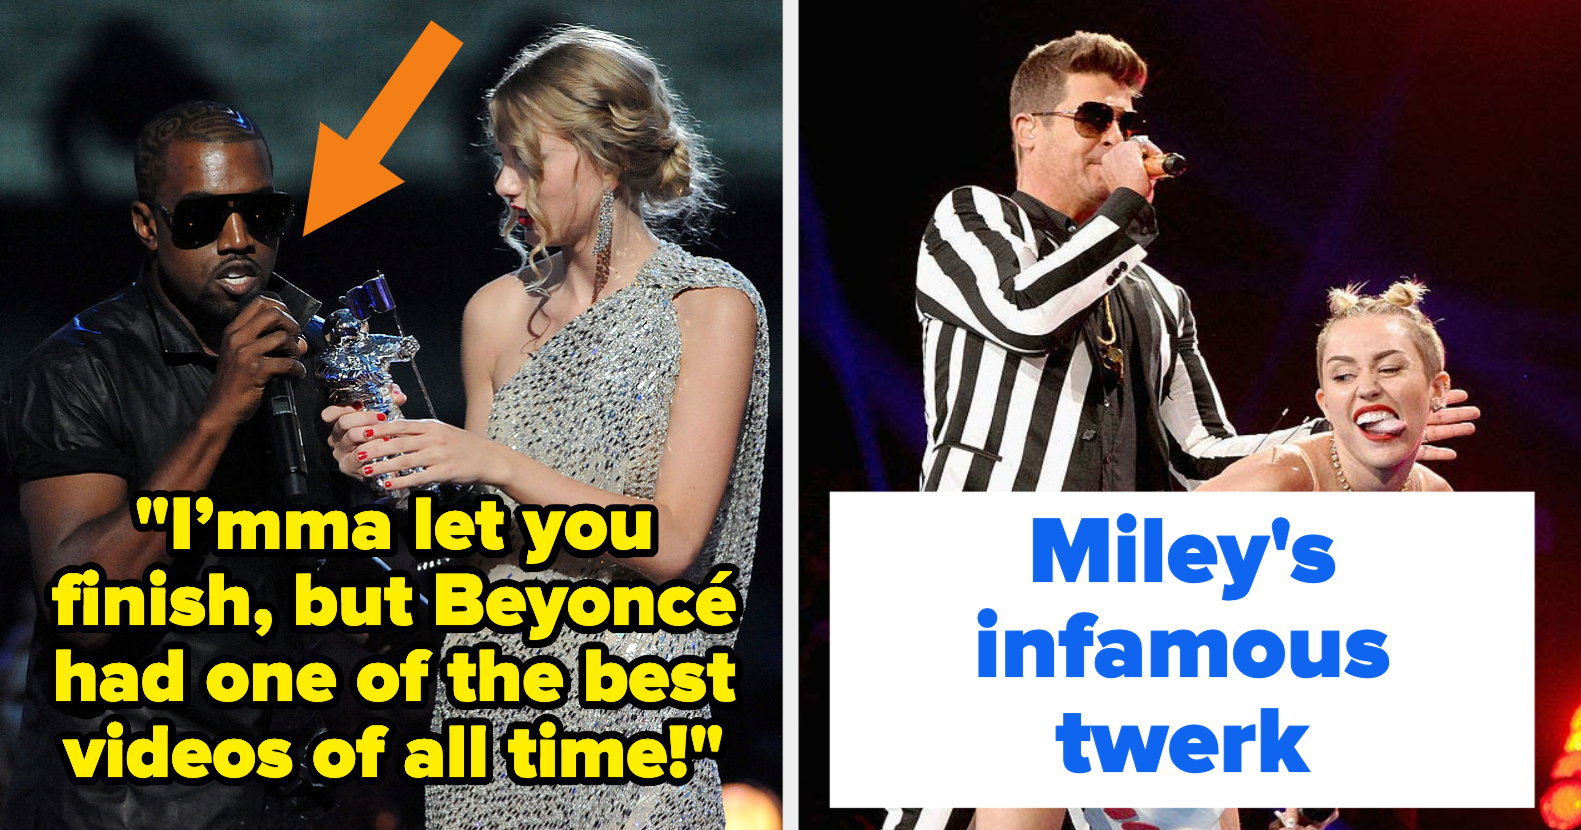 Miley Cyrus Slapping Pussy - 14 Scandals And Shocking Moments From VMAs History